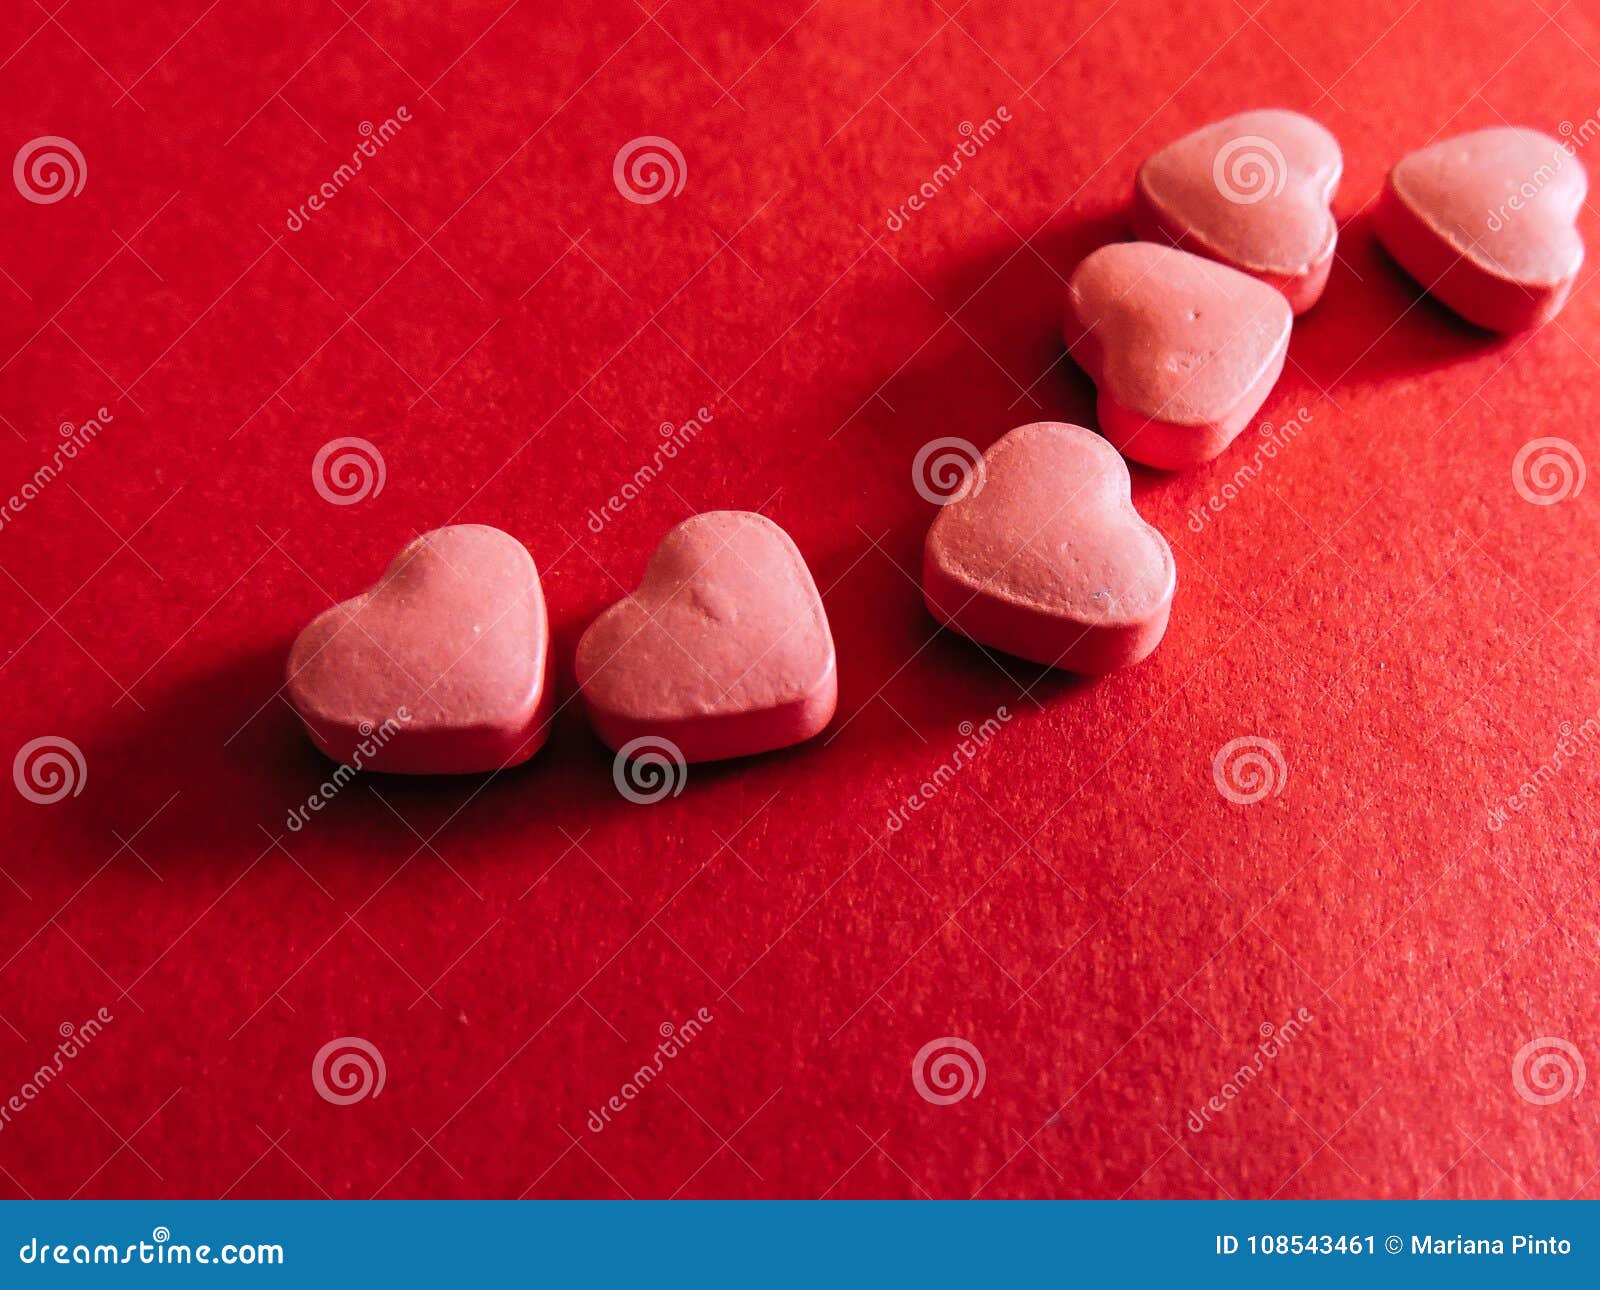 six heart tablets. valentines day.